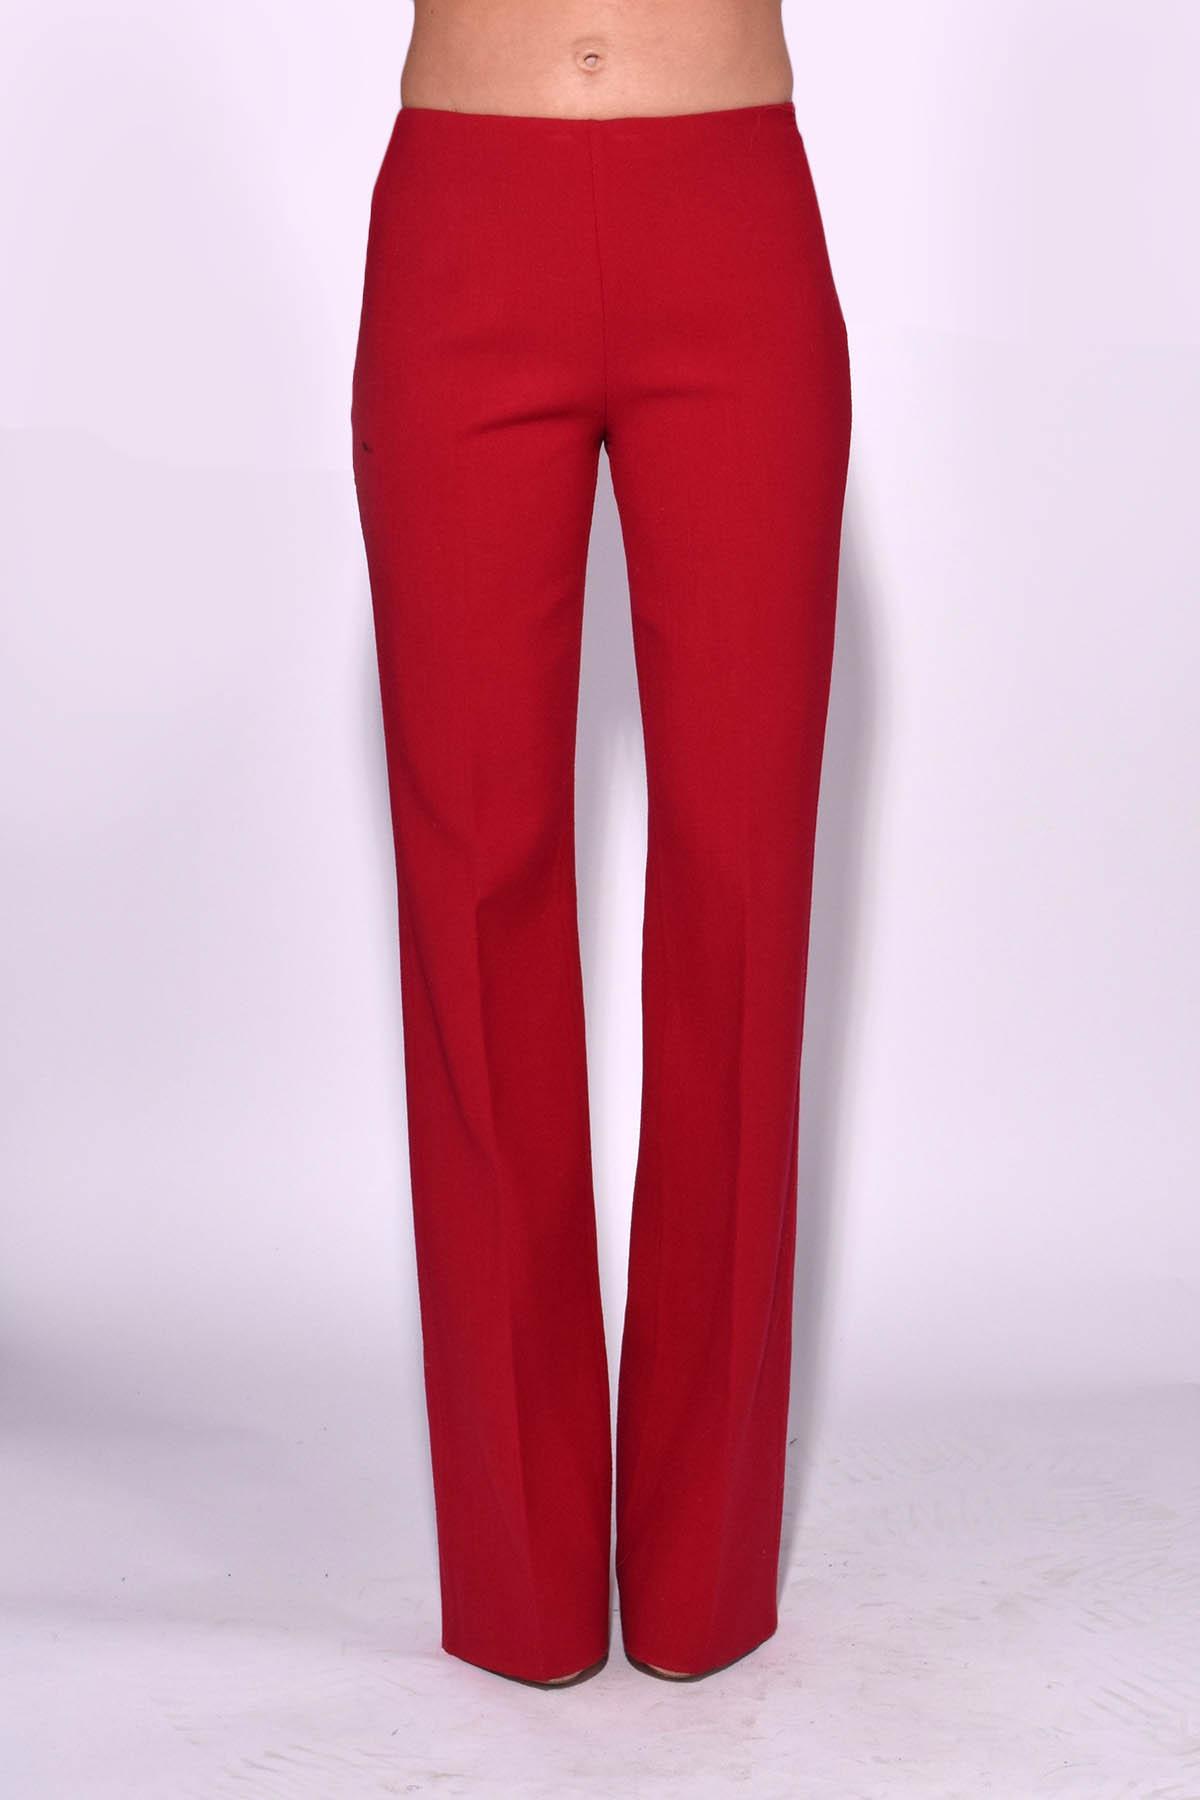 Theory Wool Demitria Flare Pant In Dark Vermillion in Red - Lyst